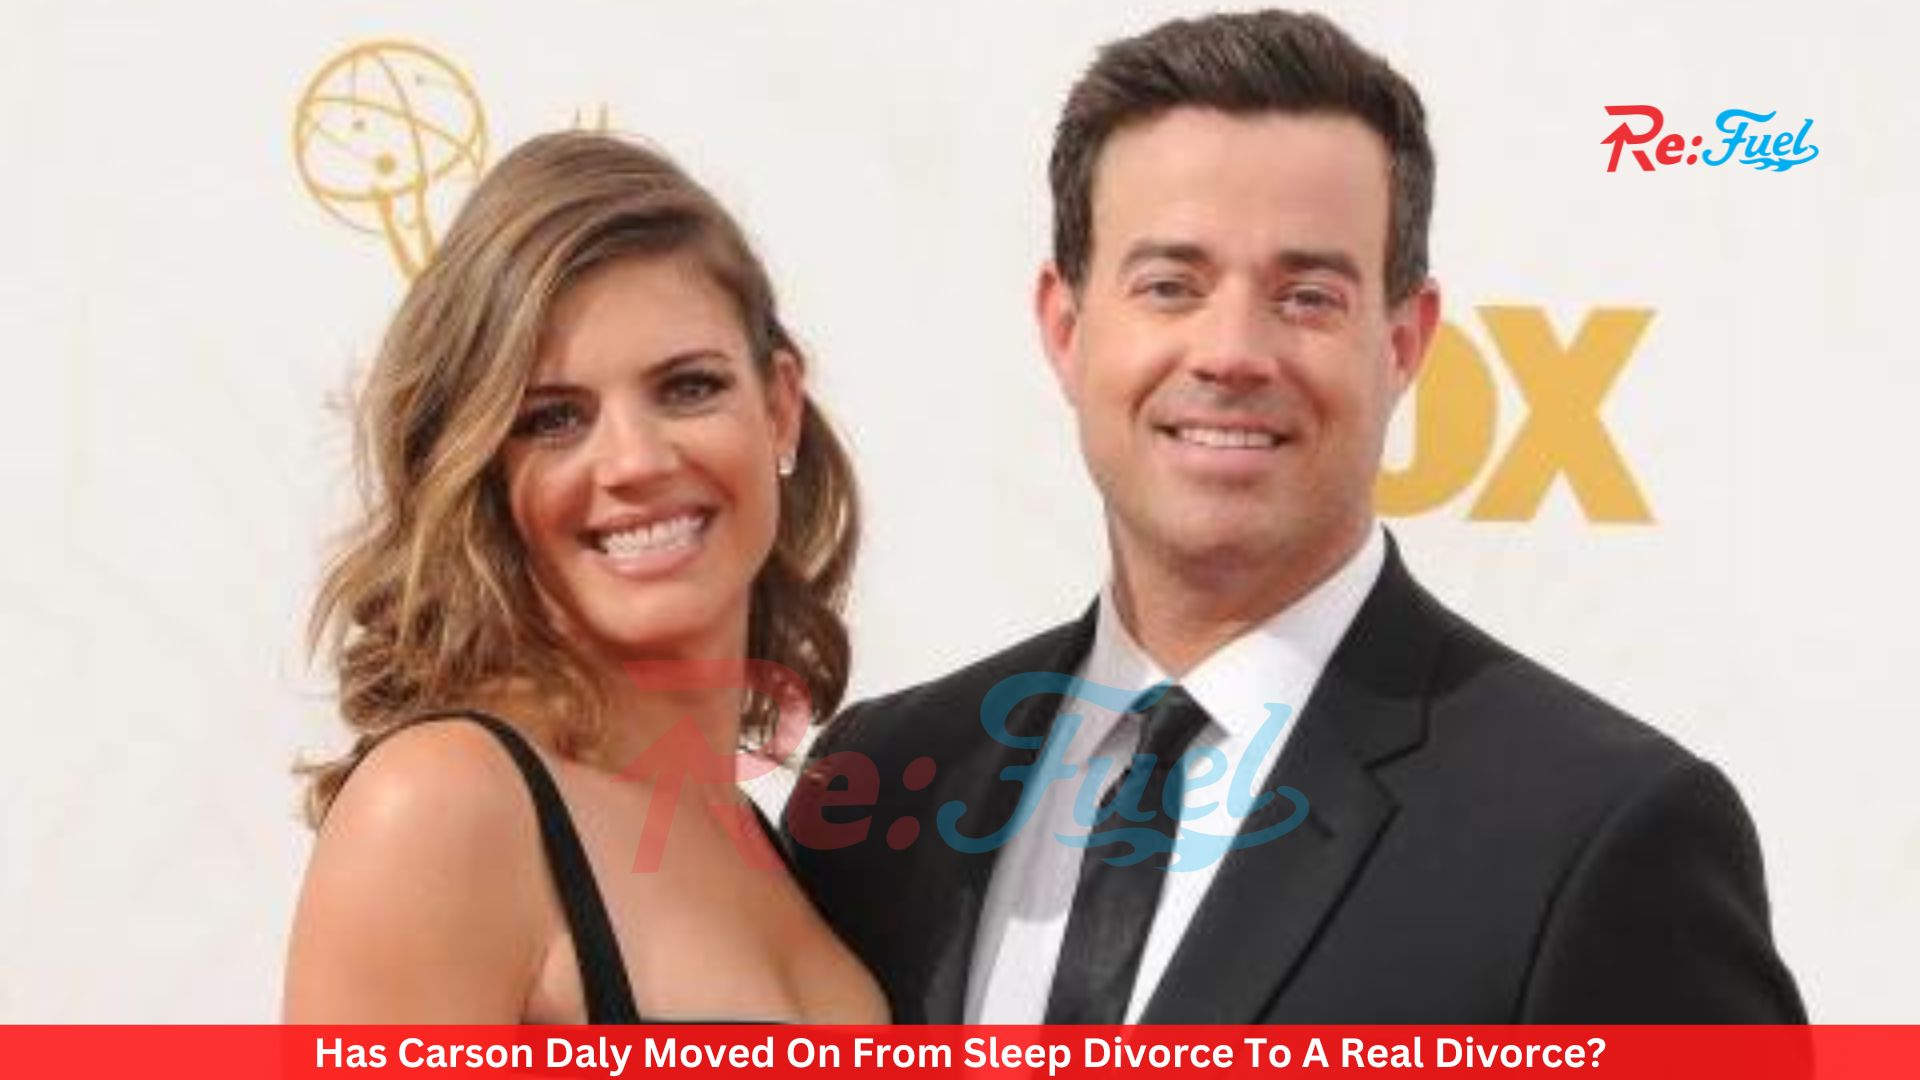 Has Carson Daly Moved On From Sleep Divorce To A Real Divorce?